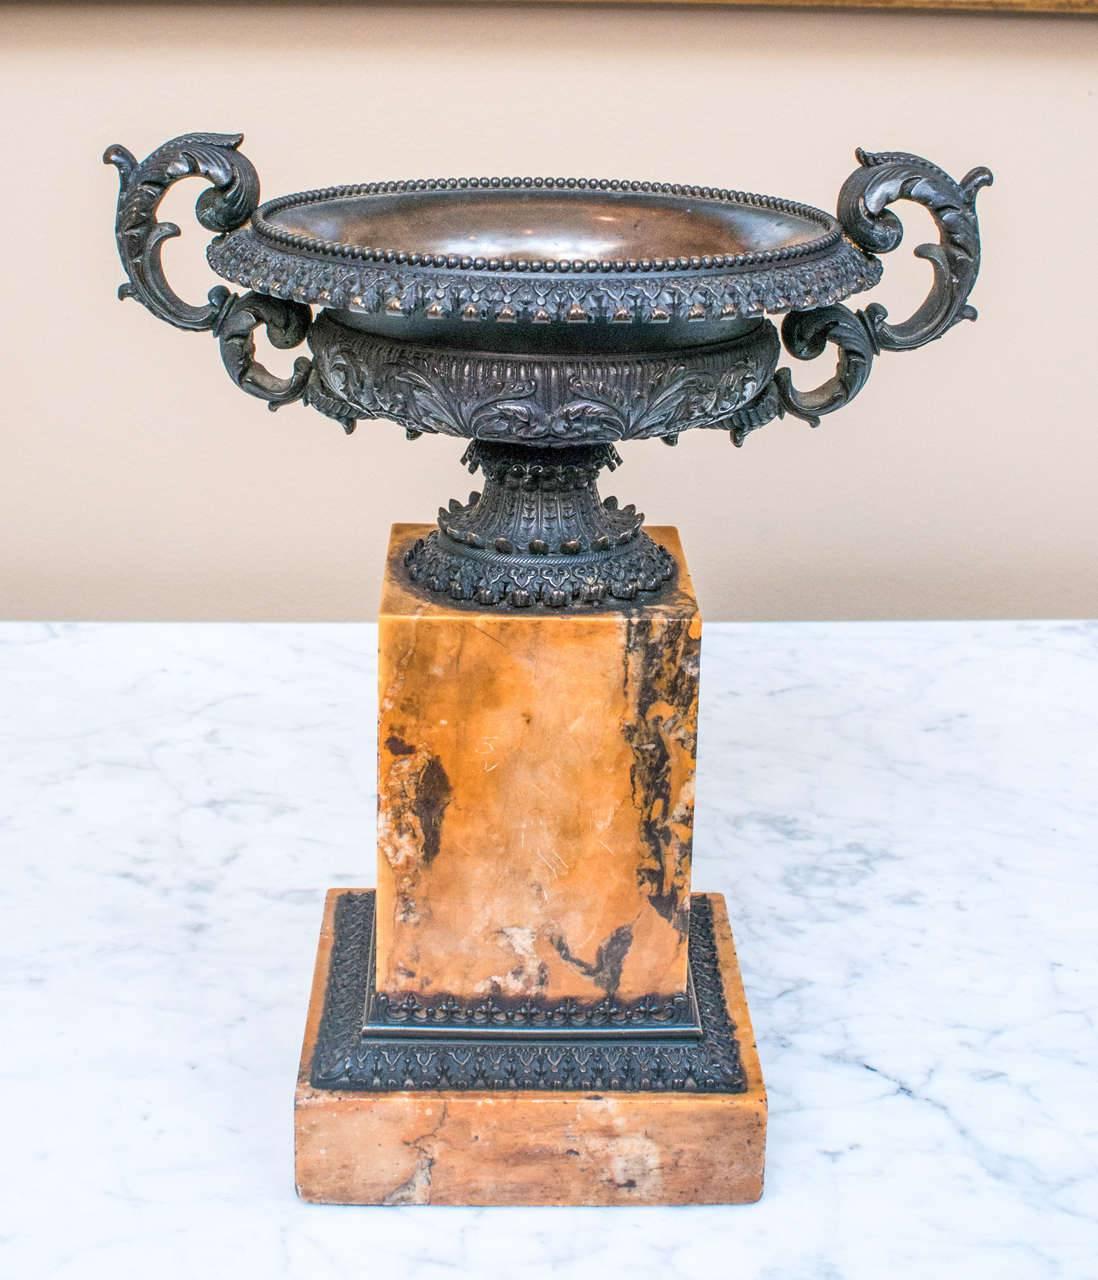 Napoleon III bronze tazzas (urns) have very fine castings and are mounted on beautiful Broccatello di Siena marble plinths. Hallmarks on bottom bronze nut include trefoils and fleur de lis.